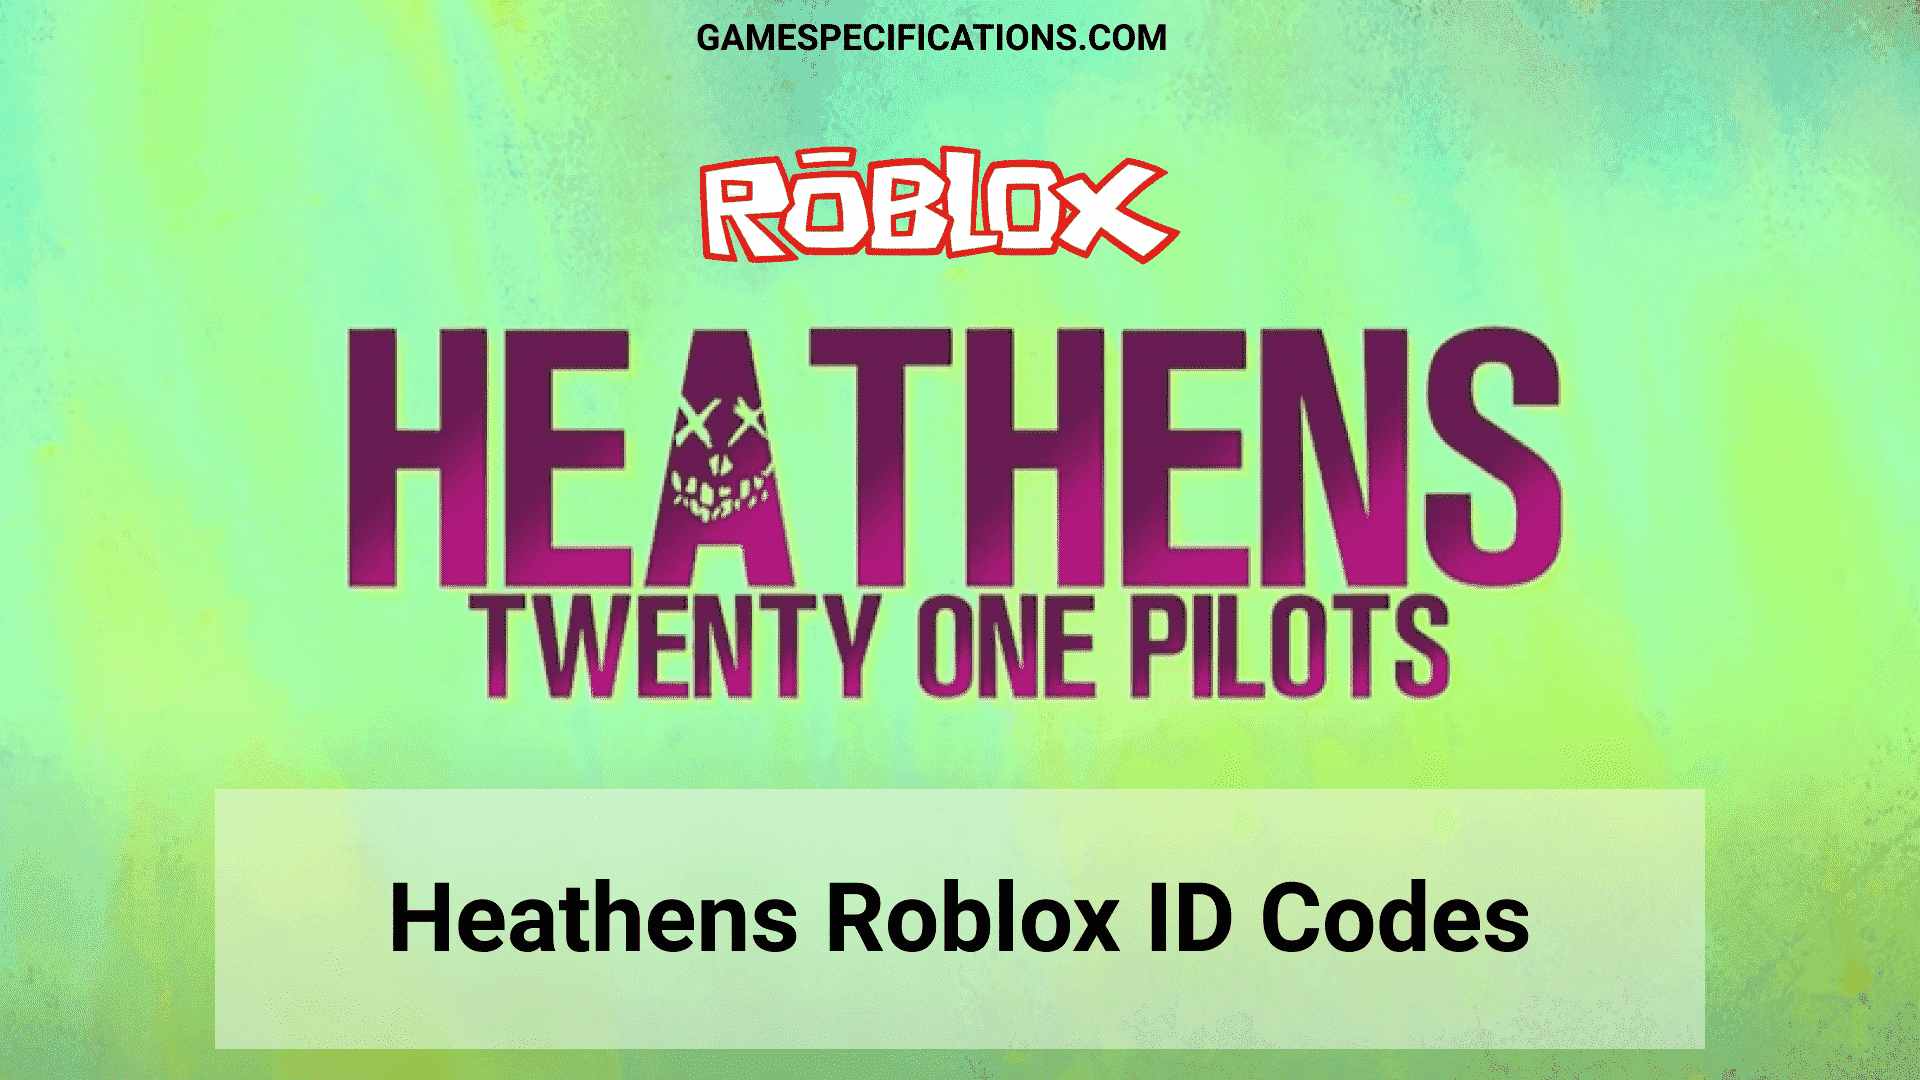 Heathens Roblox Id Codes 2021 Music Codes Game Specifications - no one roblox id